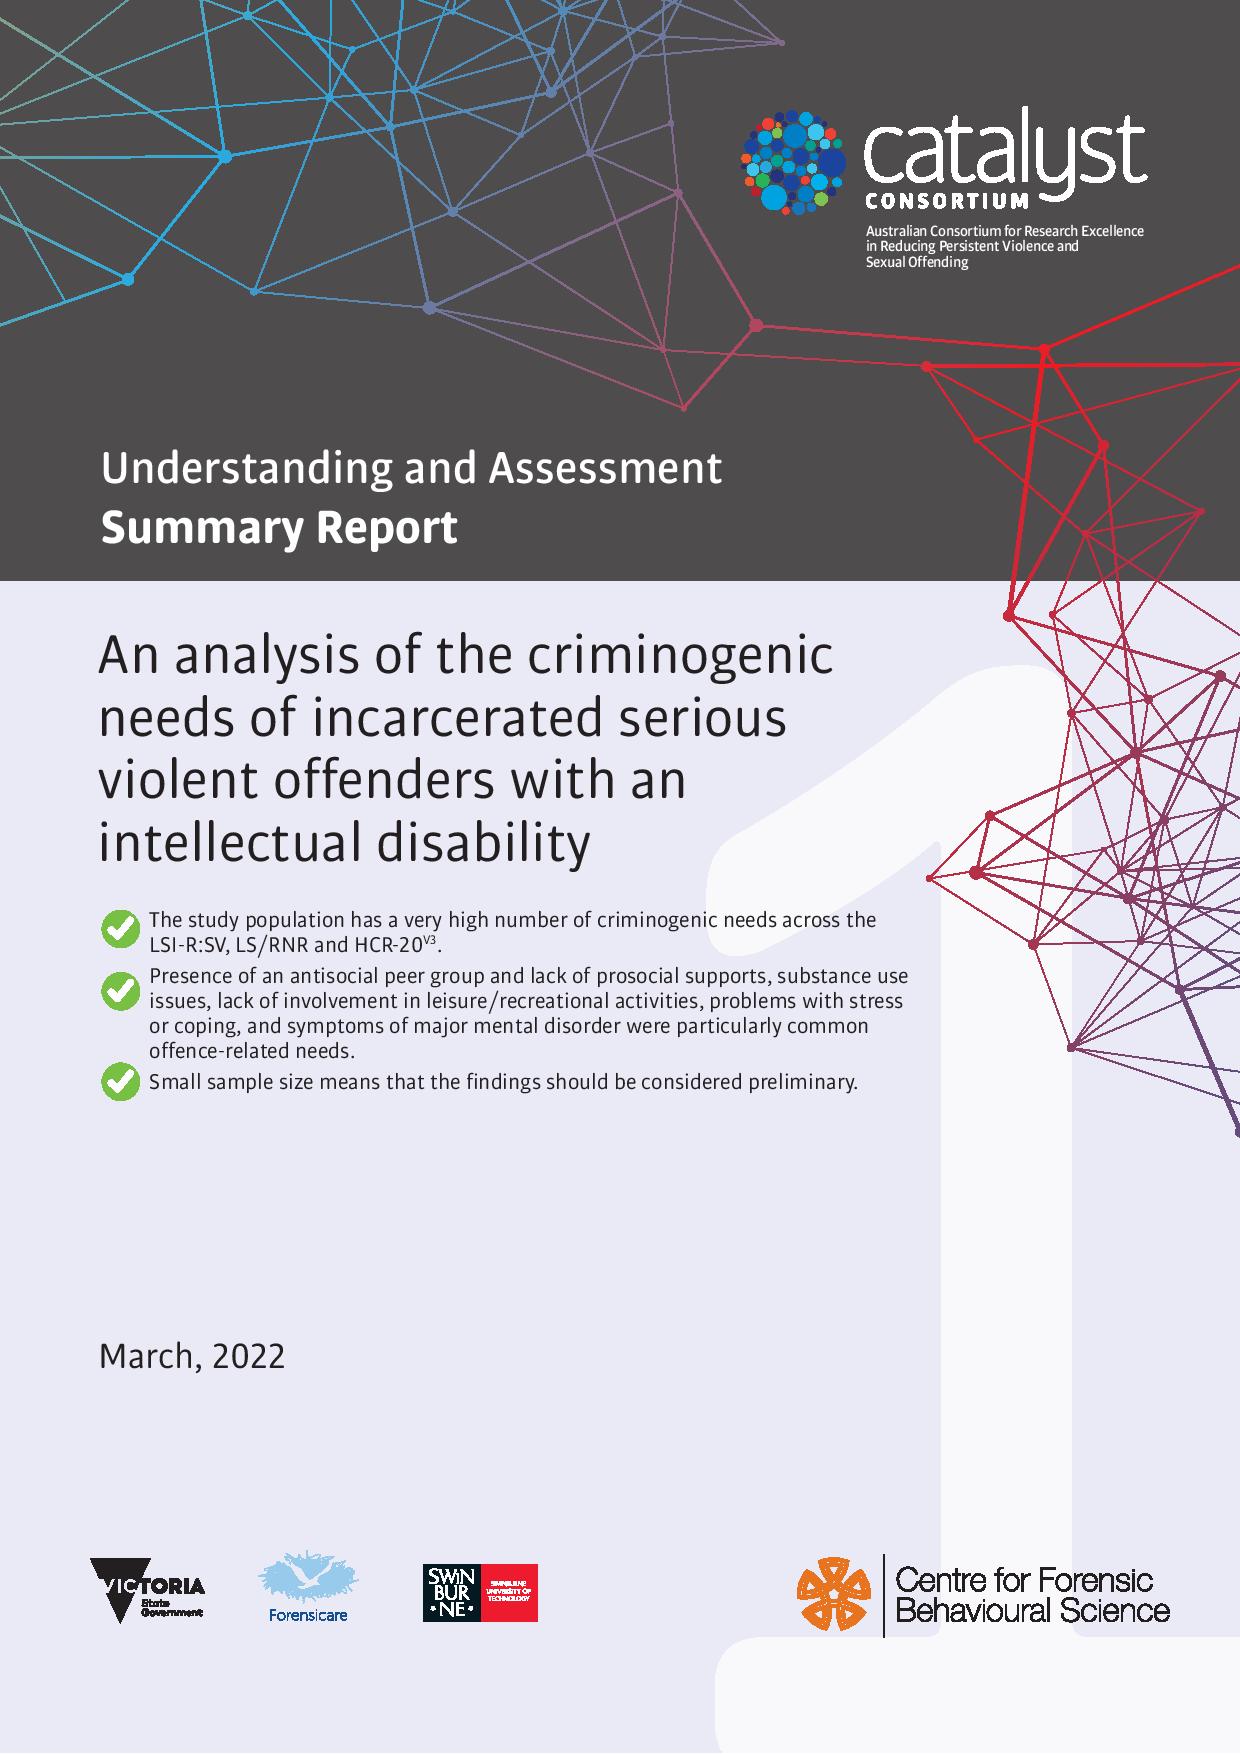 An analysis of the criminogenic needs of incarcerated serious violent offenders with an intellectual disability